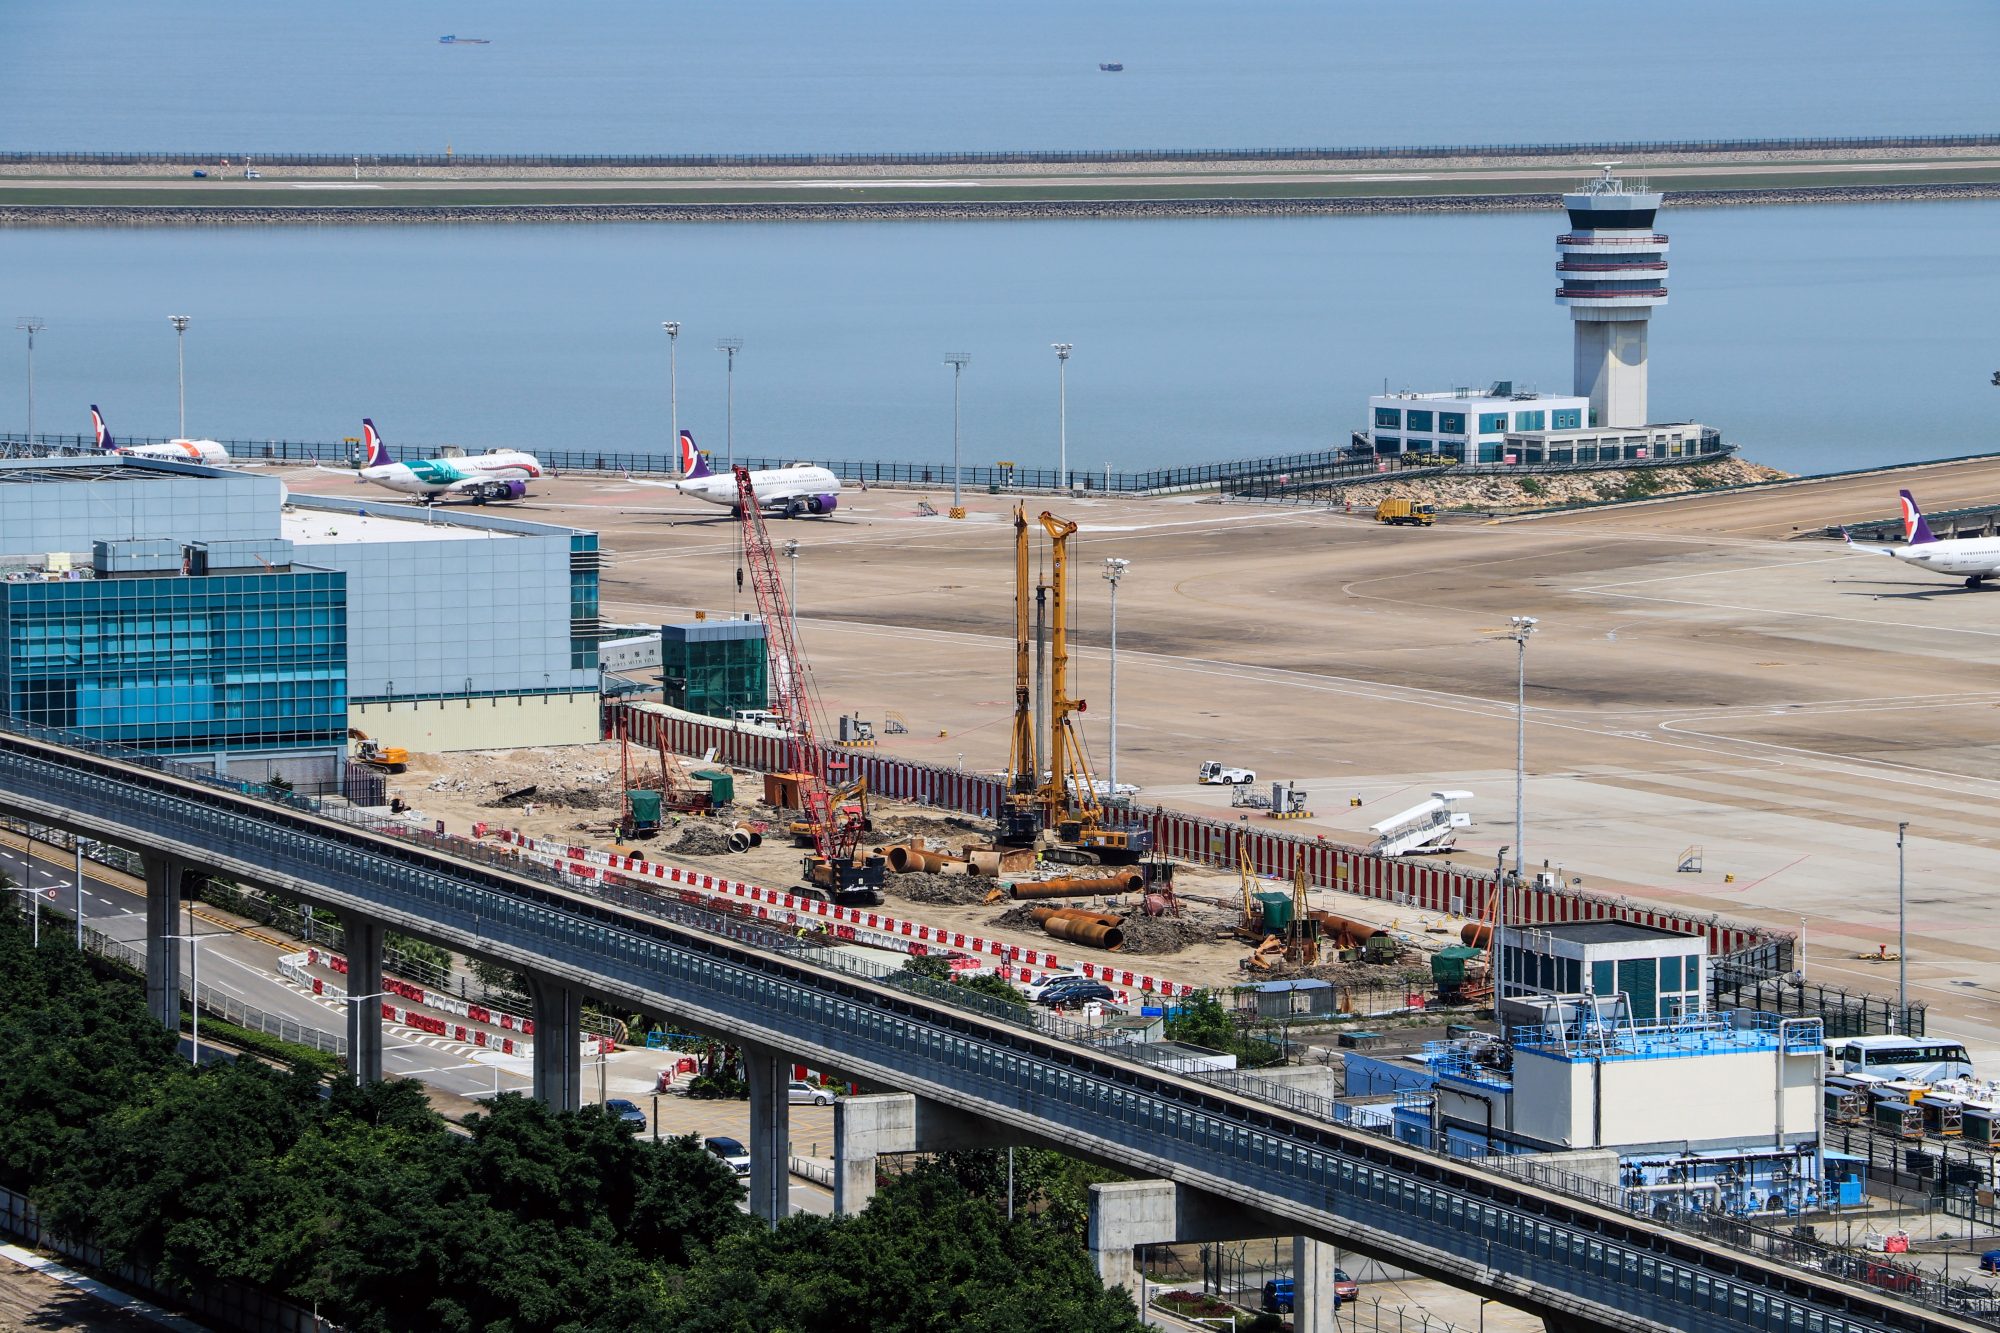 Government to ask Beijing to greenlight airport reclamation next July